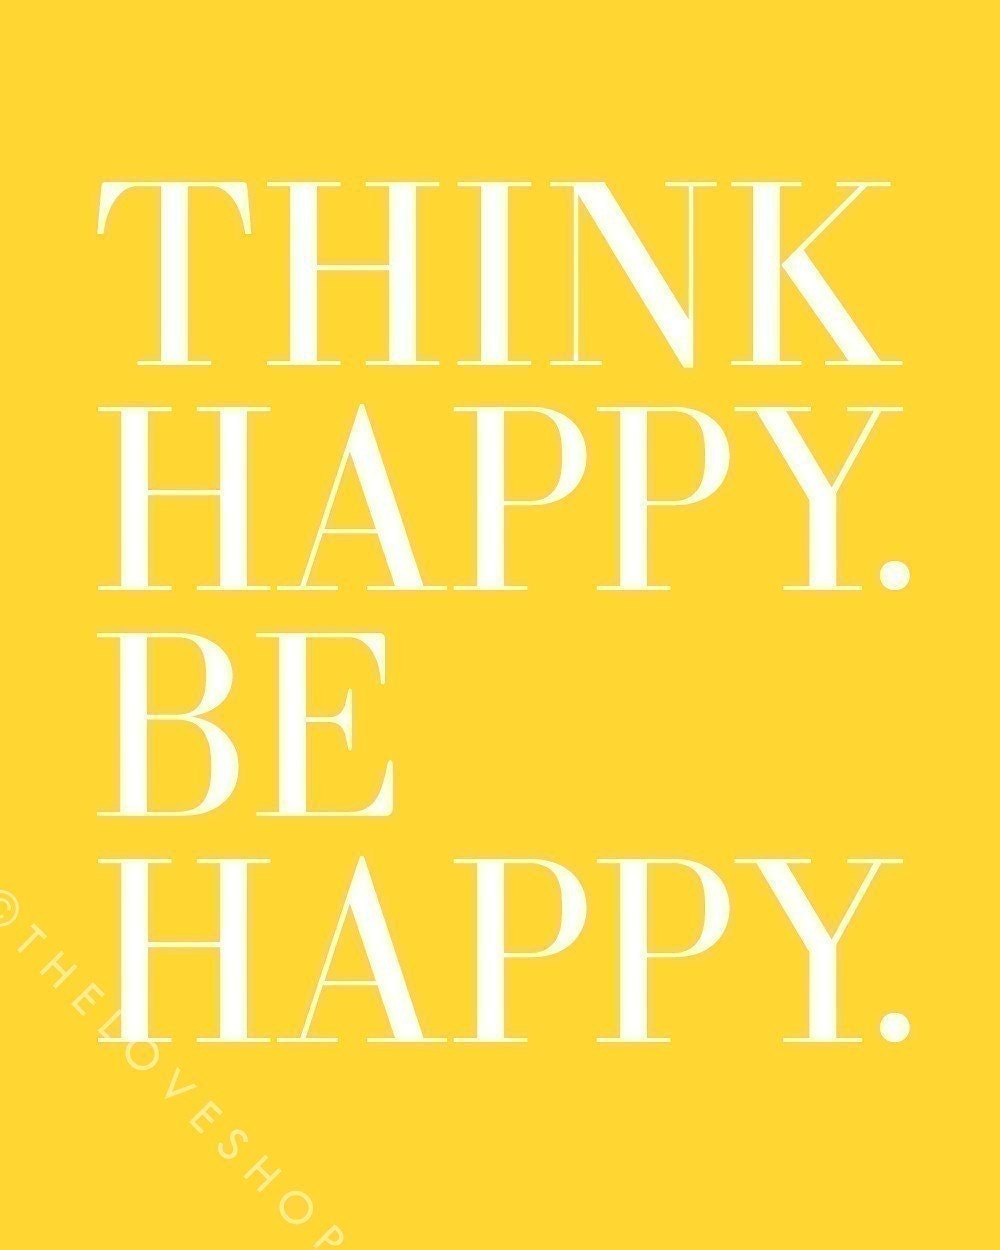 THINK HAPPY. BE HAPPY - Inspiring 8x10 inch Print (in Sunshine Yellow and Cloud White)